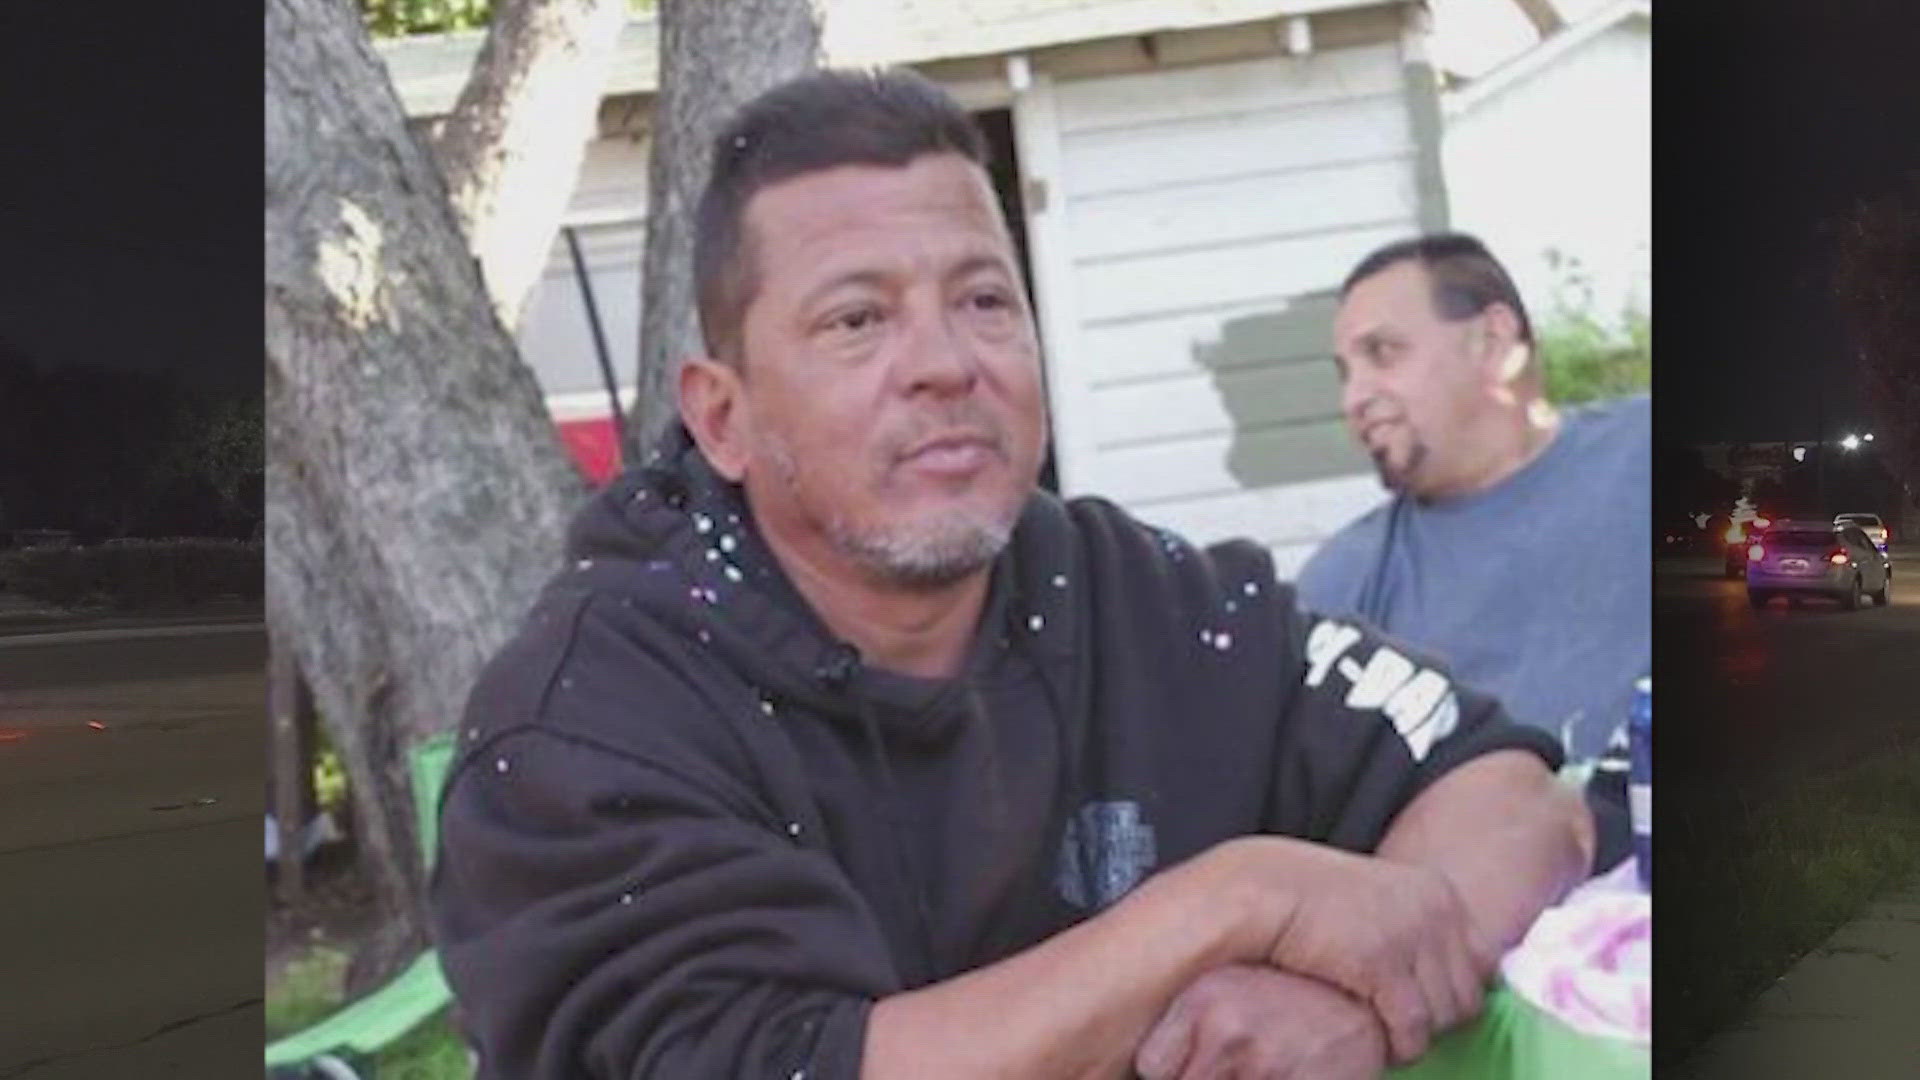 Edward "Eddie" Fernandez was killed Friday night near South Park Mall while riding his scooter.